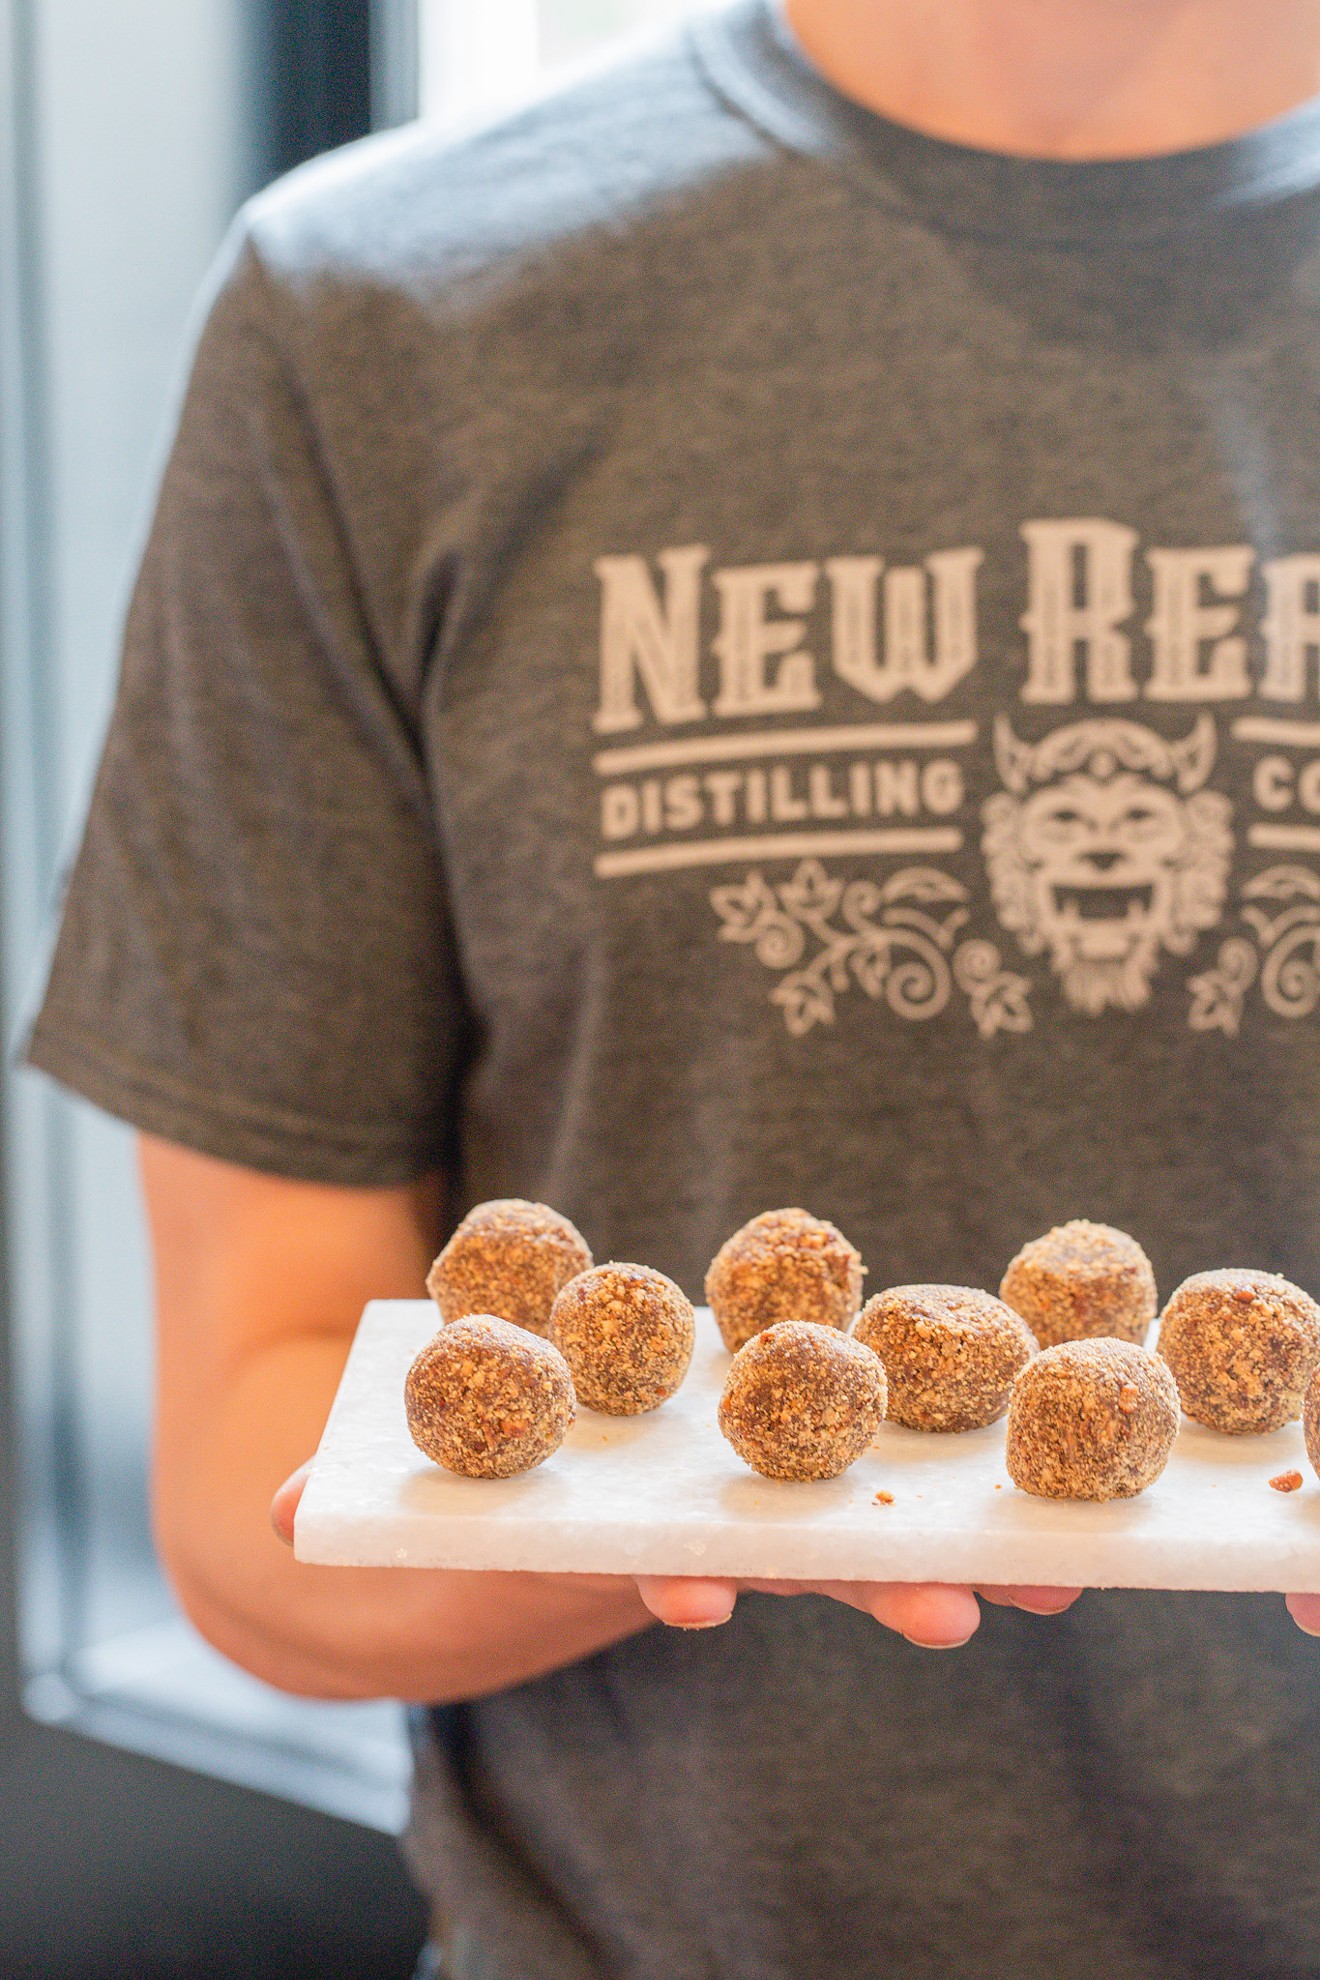 A Staff member of the New Realm Brewing offers guests Bourbon Truffles to pair with their drinks at the VIP event held April 16 at the brewery’s new location in the Historic District of Savannah.